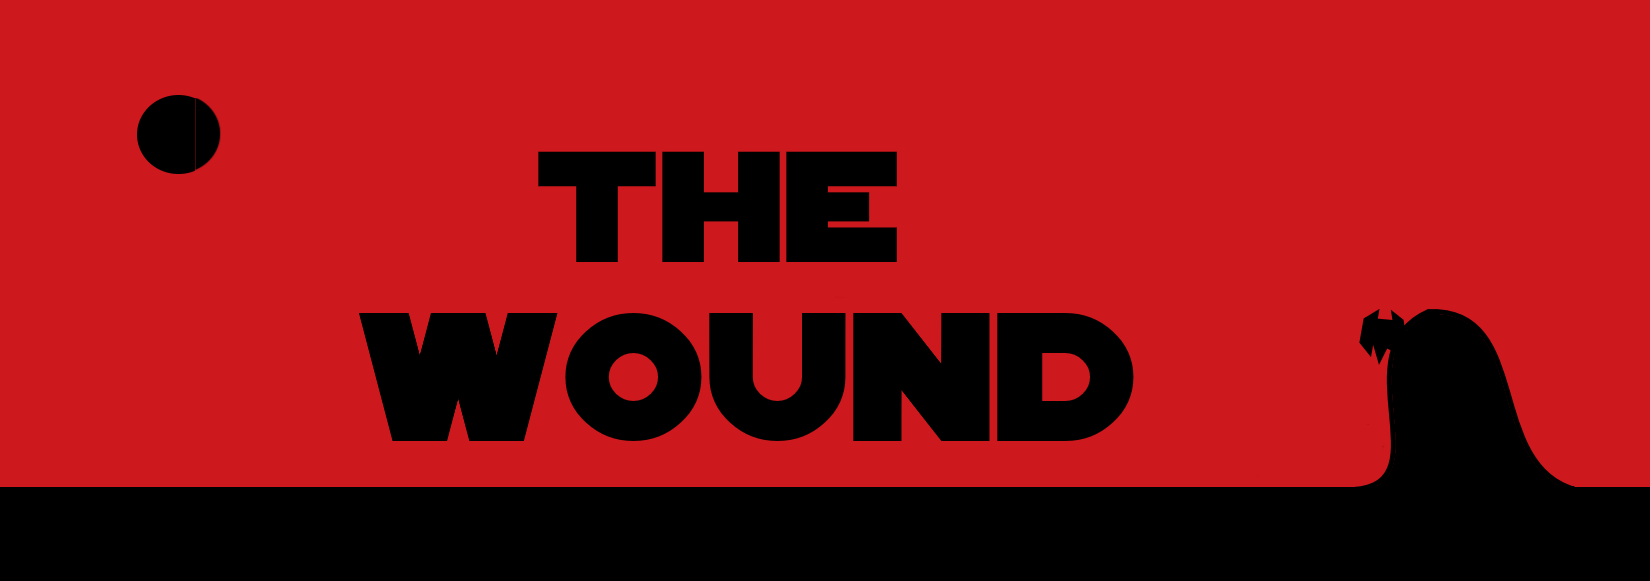 The Wound - A Galactic 2e Playbook